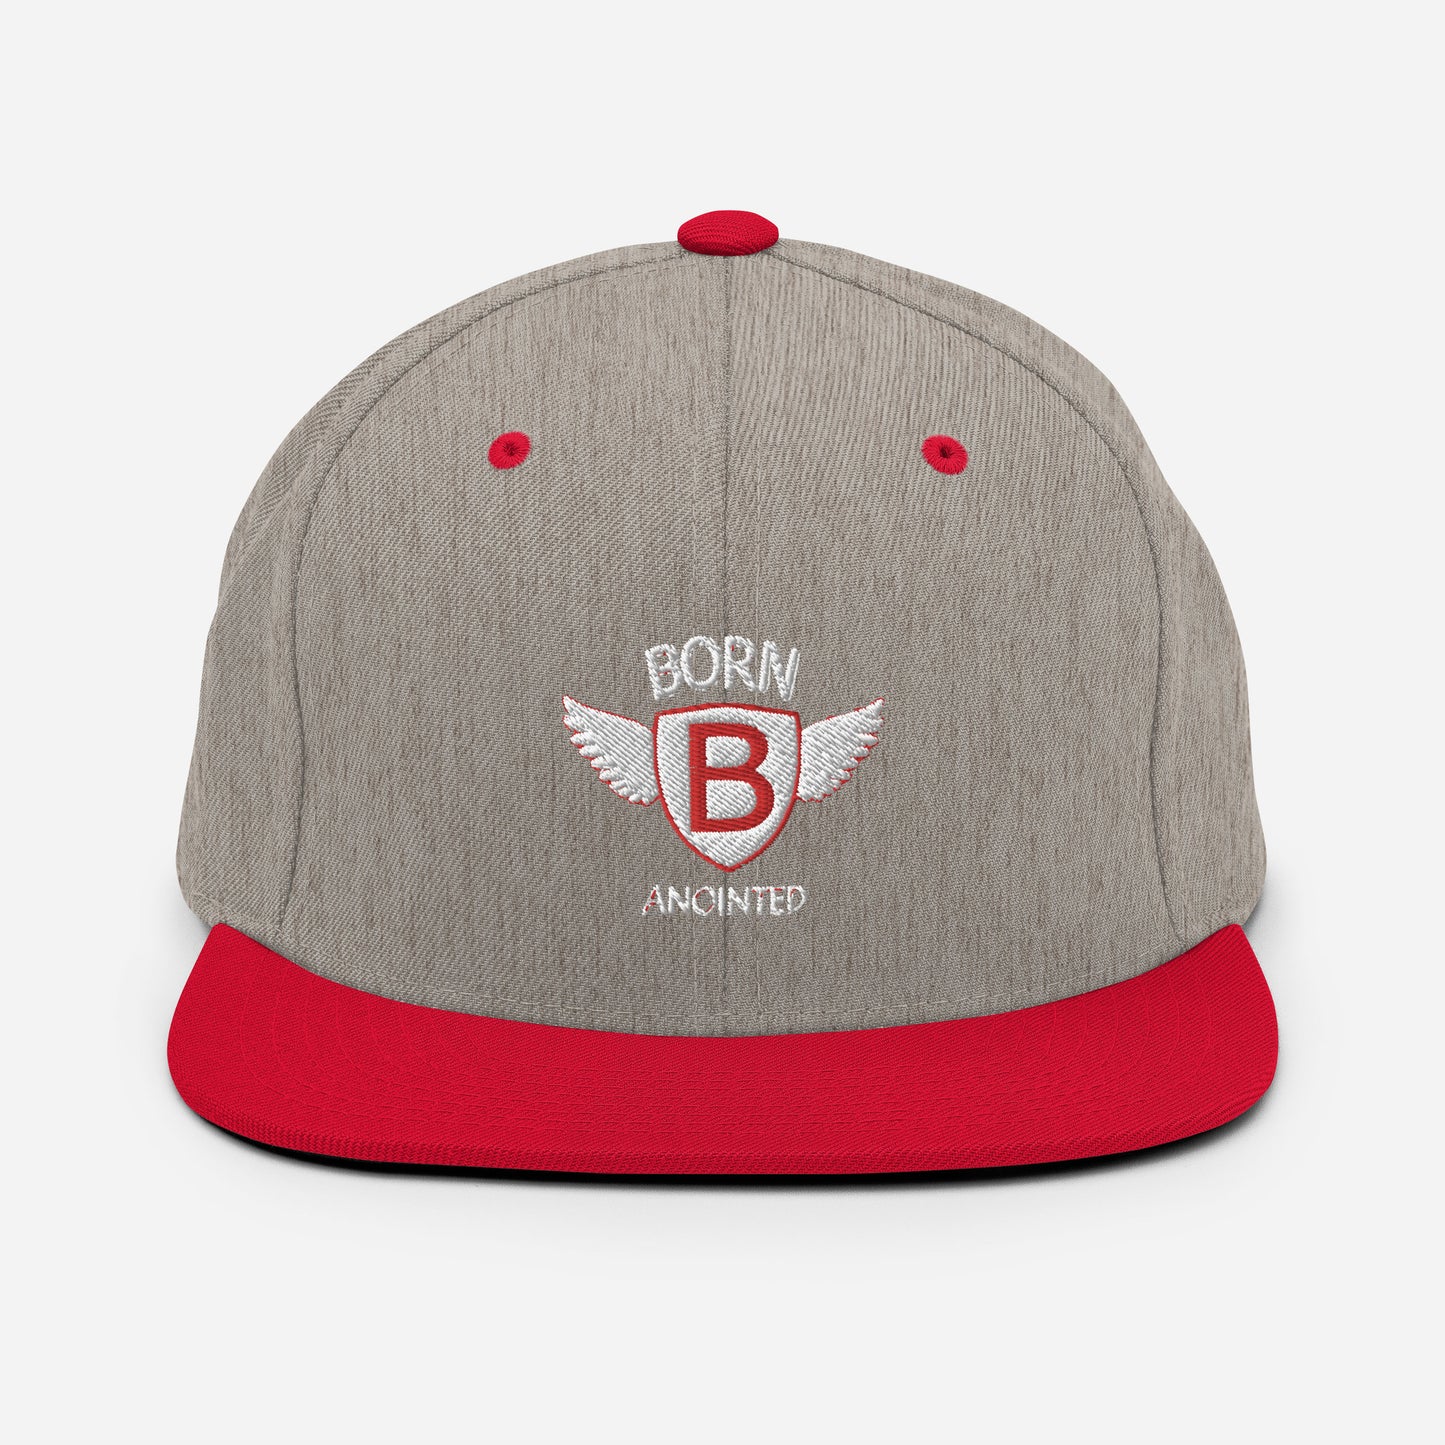 Born Anointed "Fly Angel" Red Eye Snapback Hat